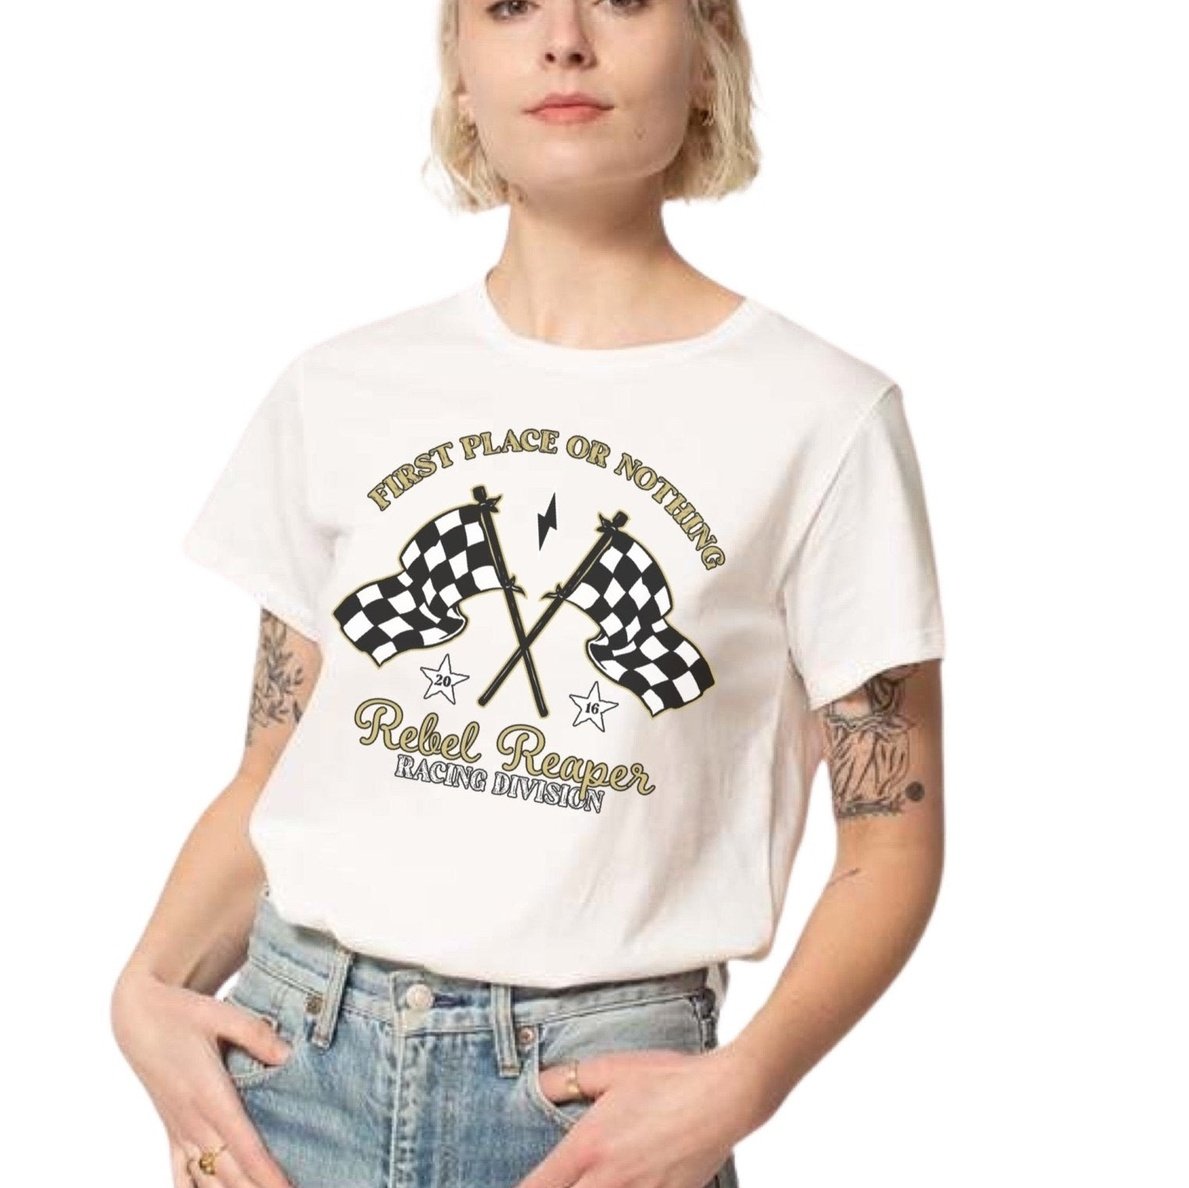 Women's Vintage White Checkered Flag Relax Tee - Rebel Reaper Clothing Company Women's Shirts